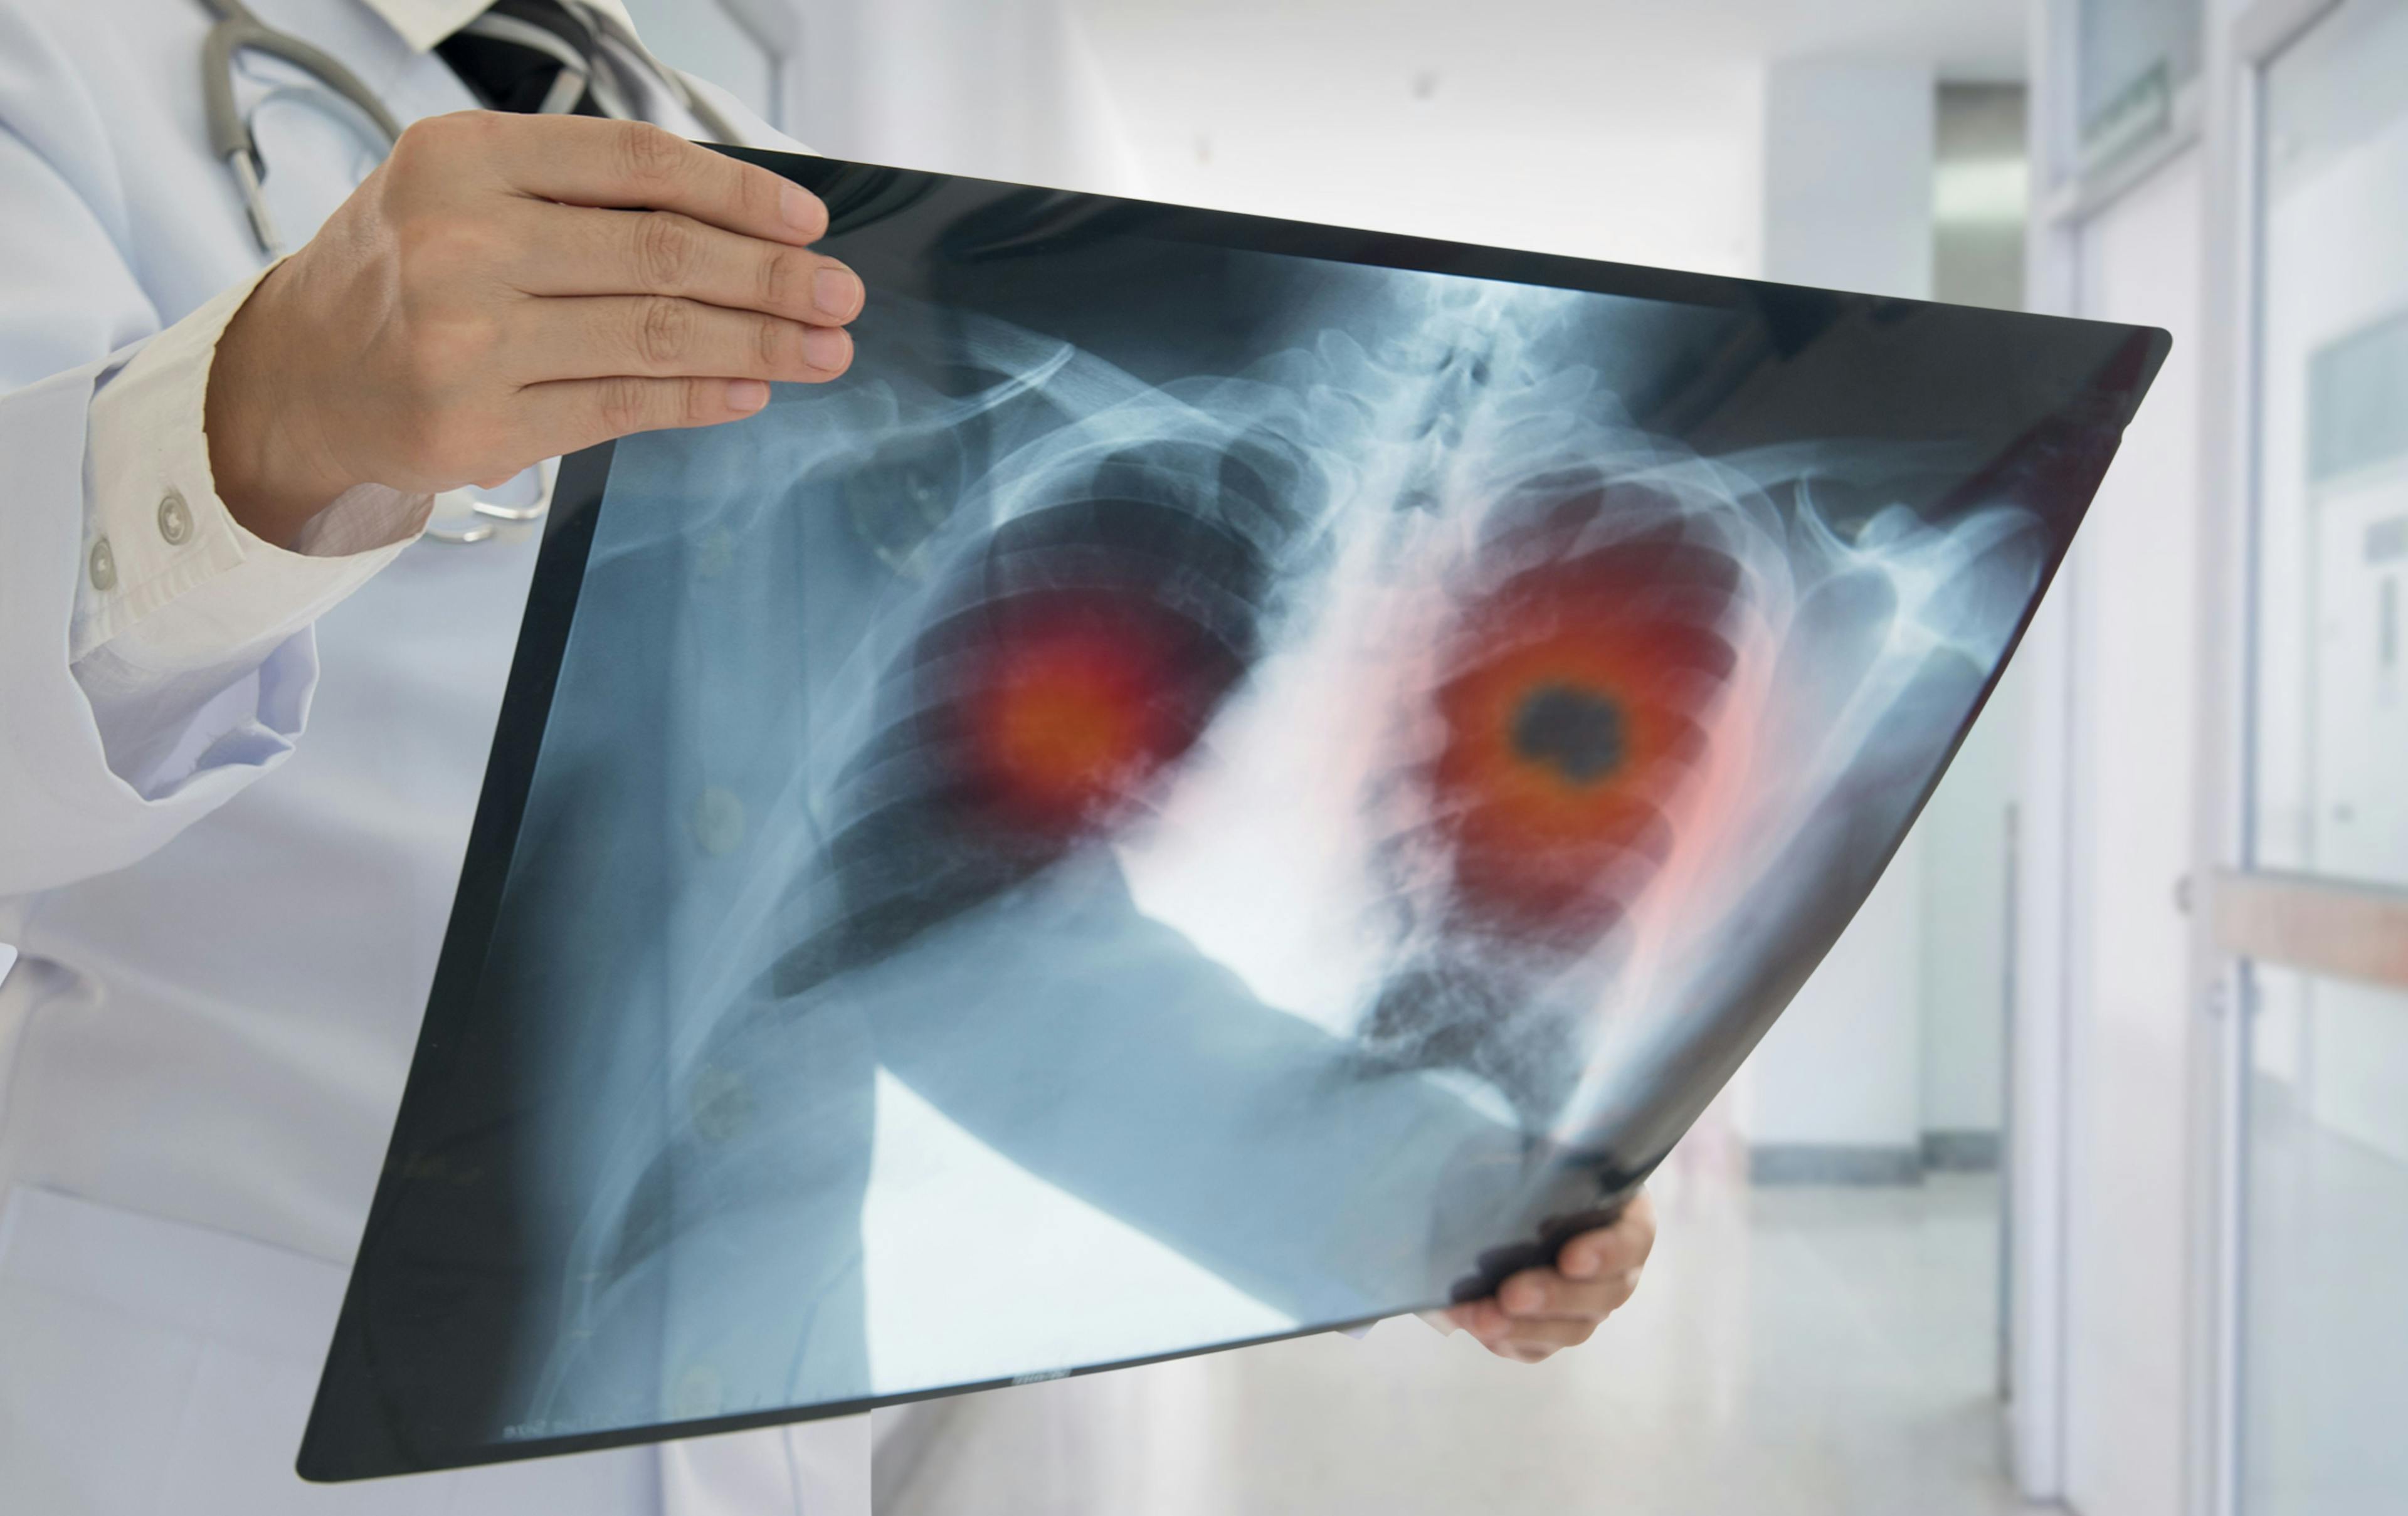 Health care worker examining lung x-ray